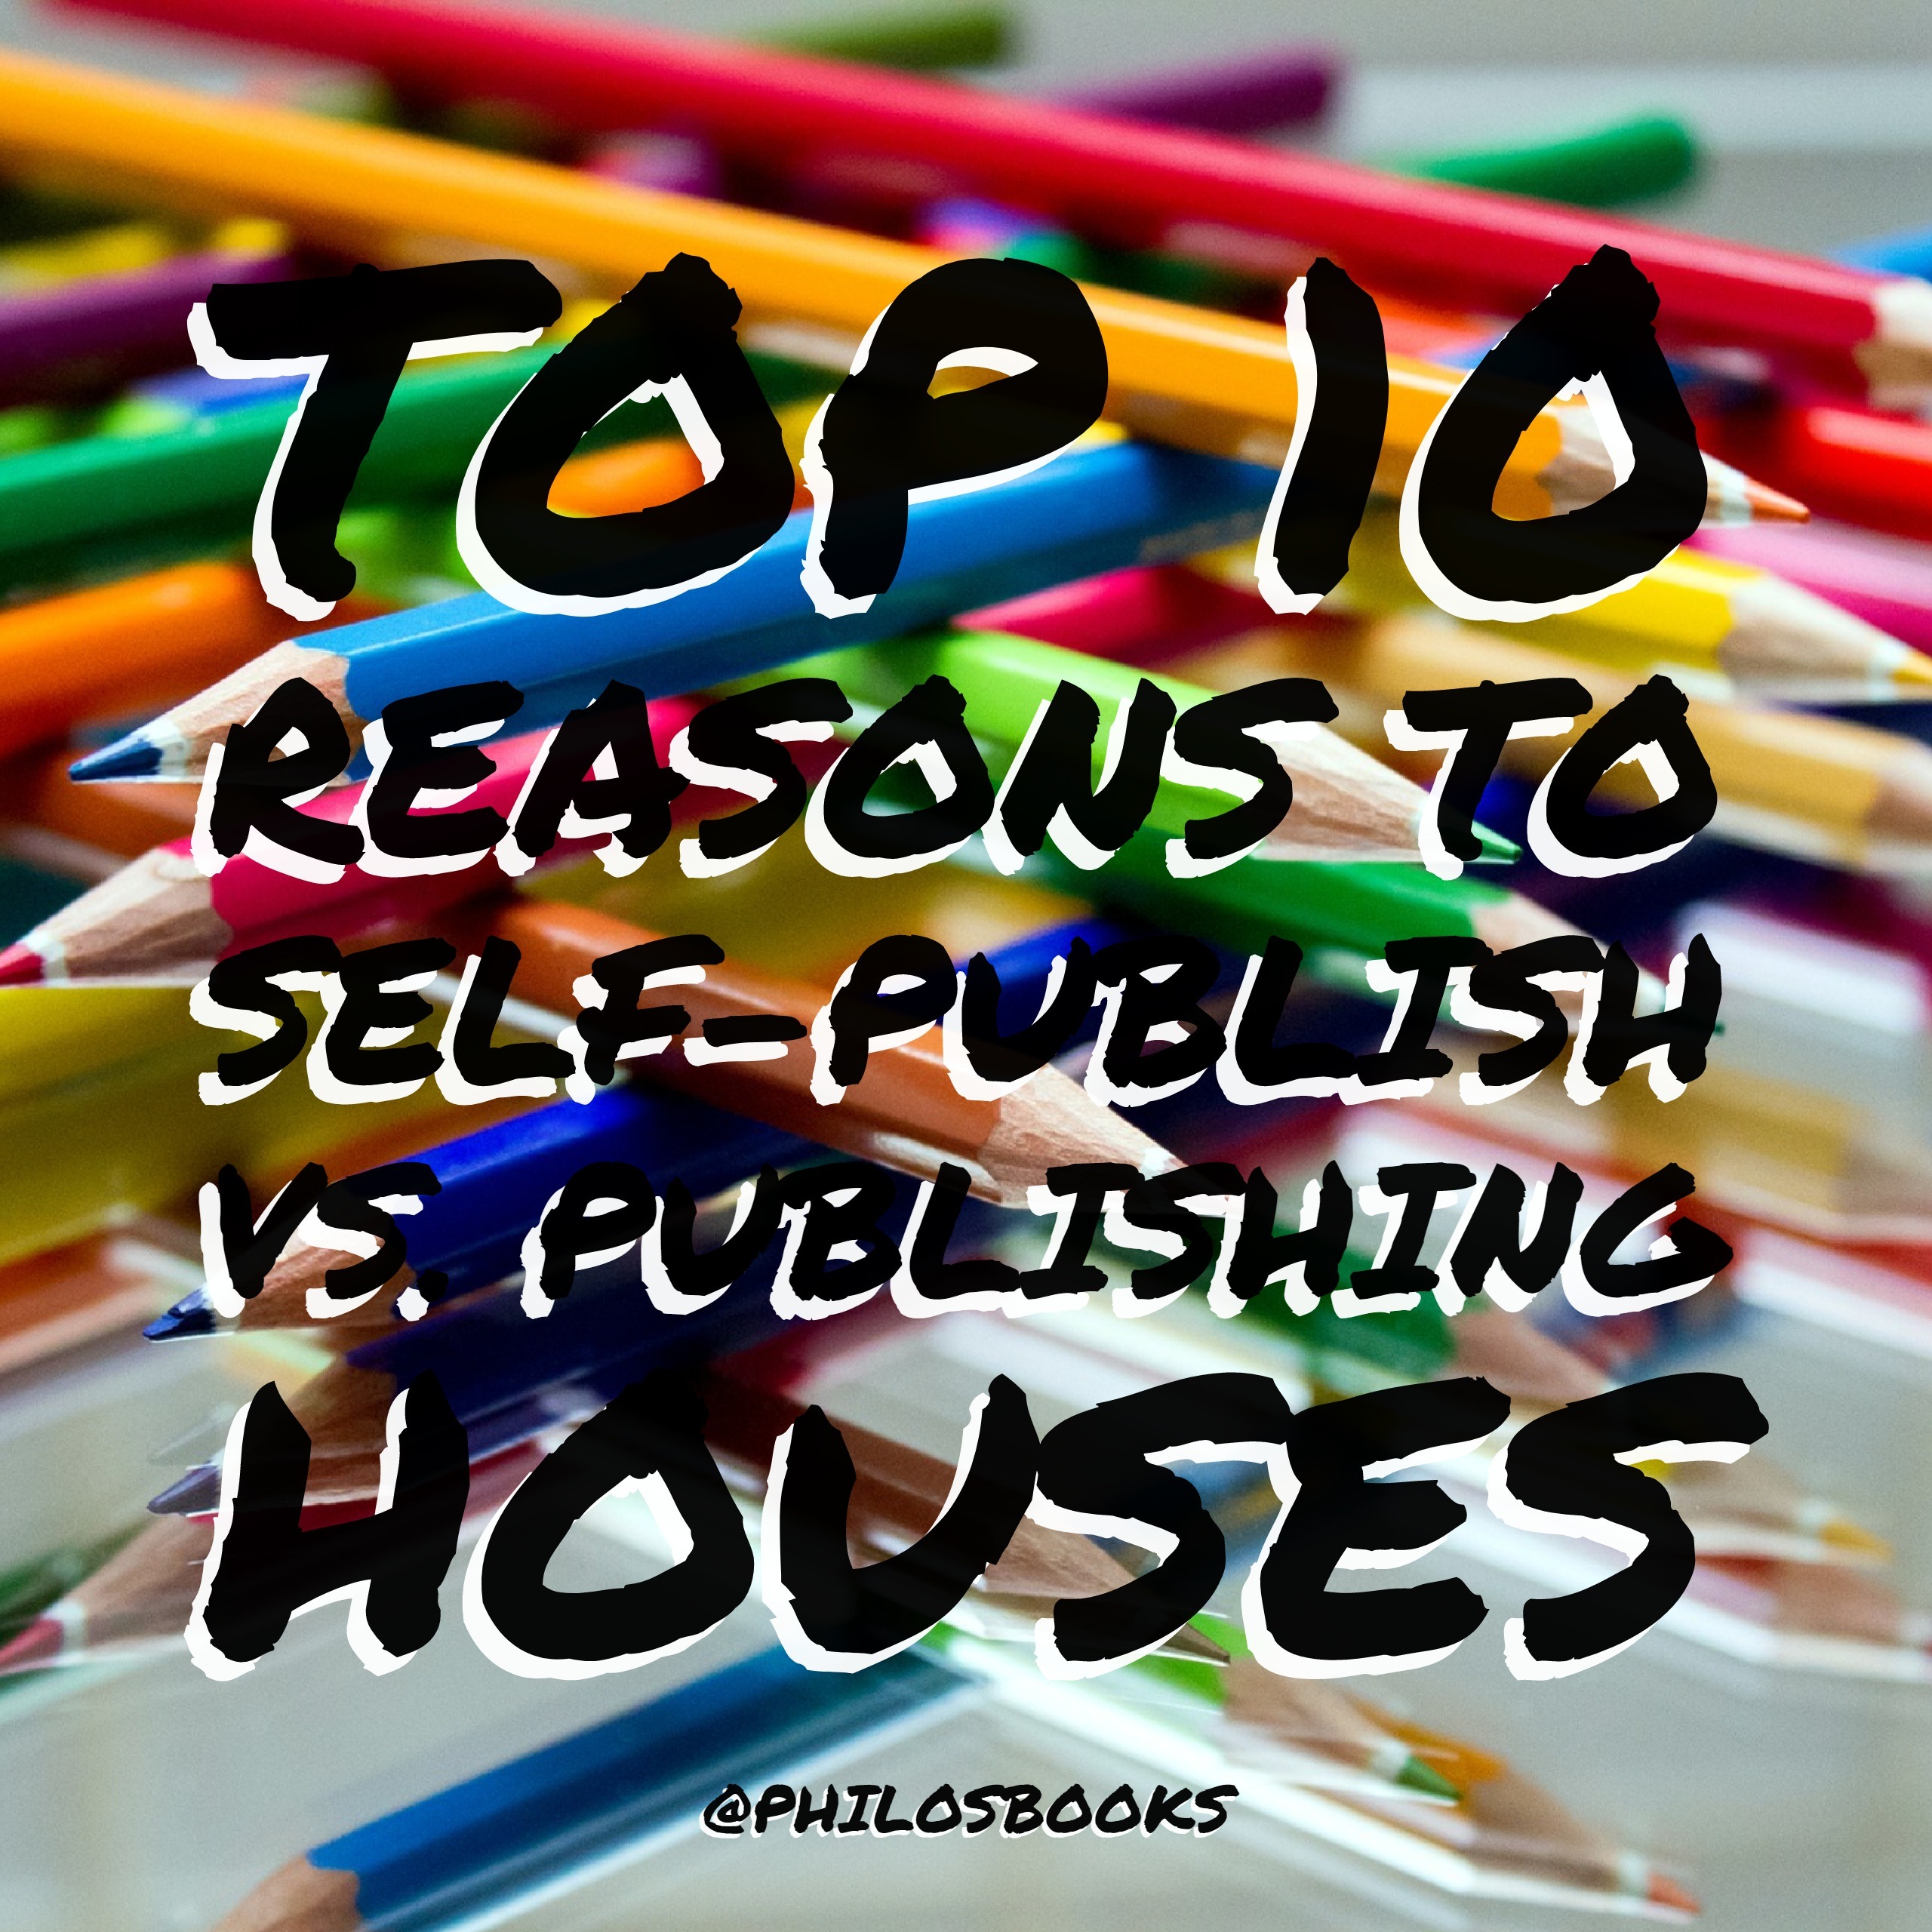 Save Your Money to Enjoy Retirement: Top 10 Reasons to Self-Publish